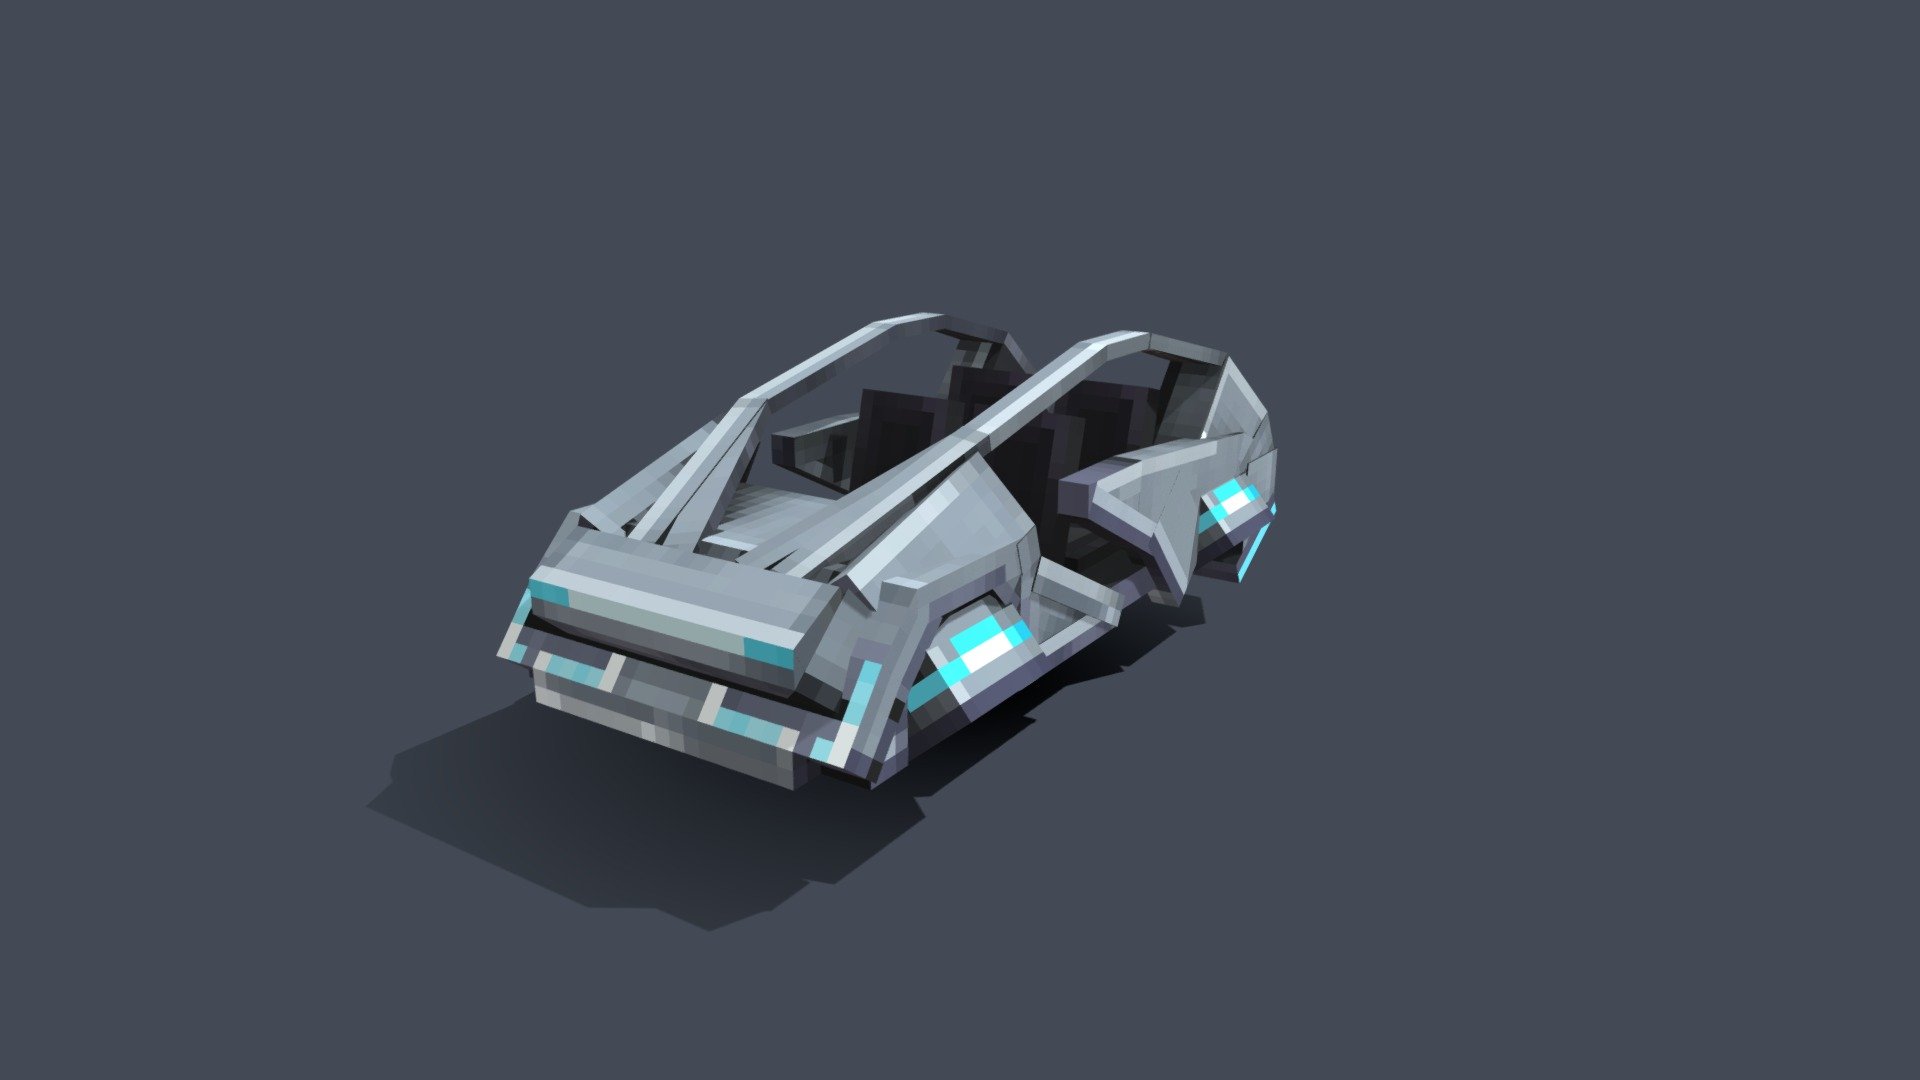 Sci fi car - Minecraft Blockbench vehicle

Want to have a custom model? Contact: wasteland4013 (Discord)|Comms Open - Sci fi car - Minecraft Blockbench vehicle - 3D model by W'Projects (@wprojects) 3d model